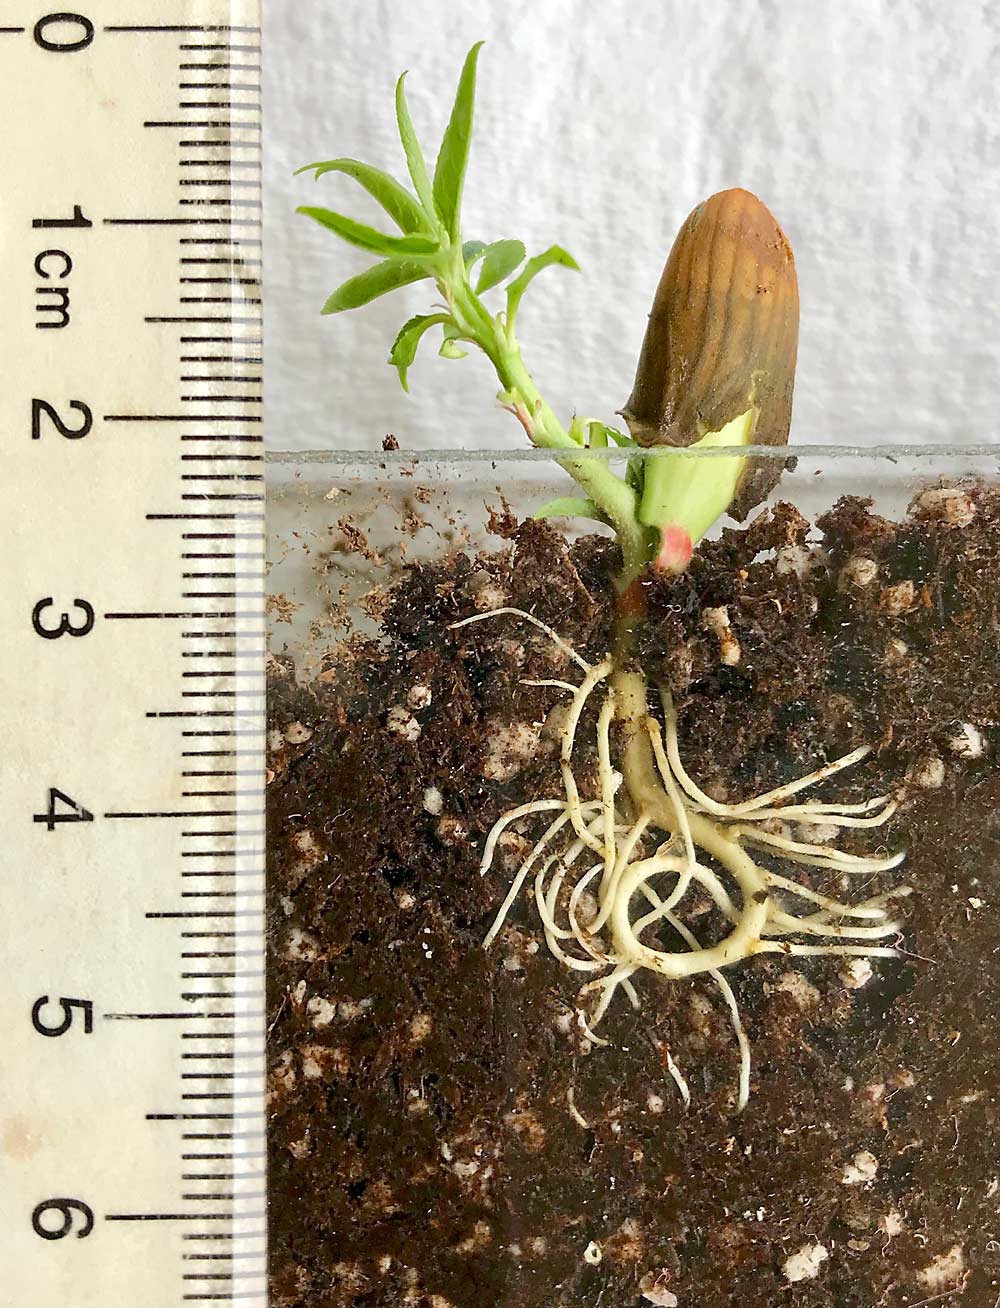 This peach rootstock seedling, a progeny from the backcross of Flordaguard and a peach/almond hybrid called 1251, was transplanted into a rhizotron to analyze its root system architecture. University of Florida breeders are studying this and other rootstocks, seeking greater variety for Florida peach growers. (Courtesy Ricardo Lesmes-Vesga/University of Florida)